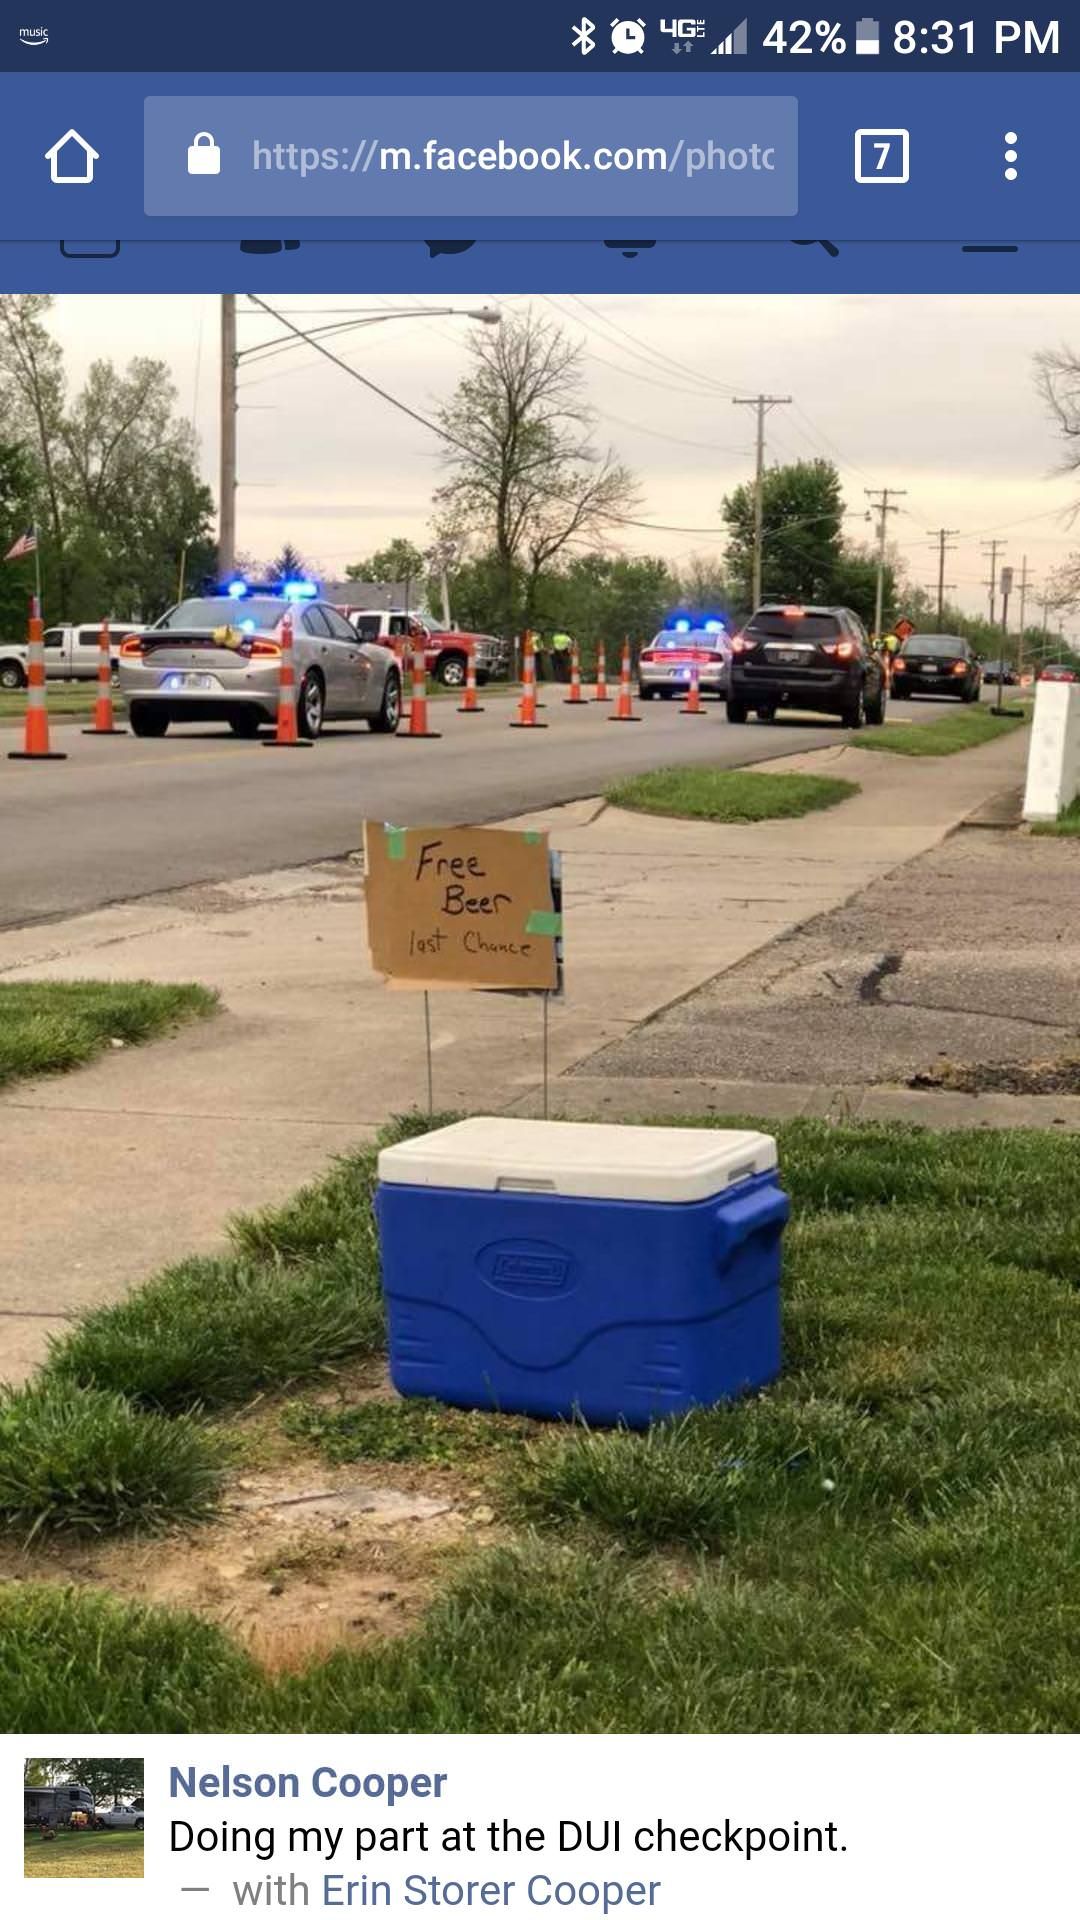 Buddy has a DUI check point in front of his house tonight